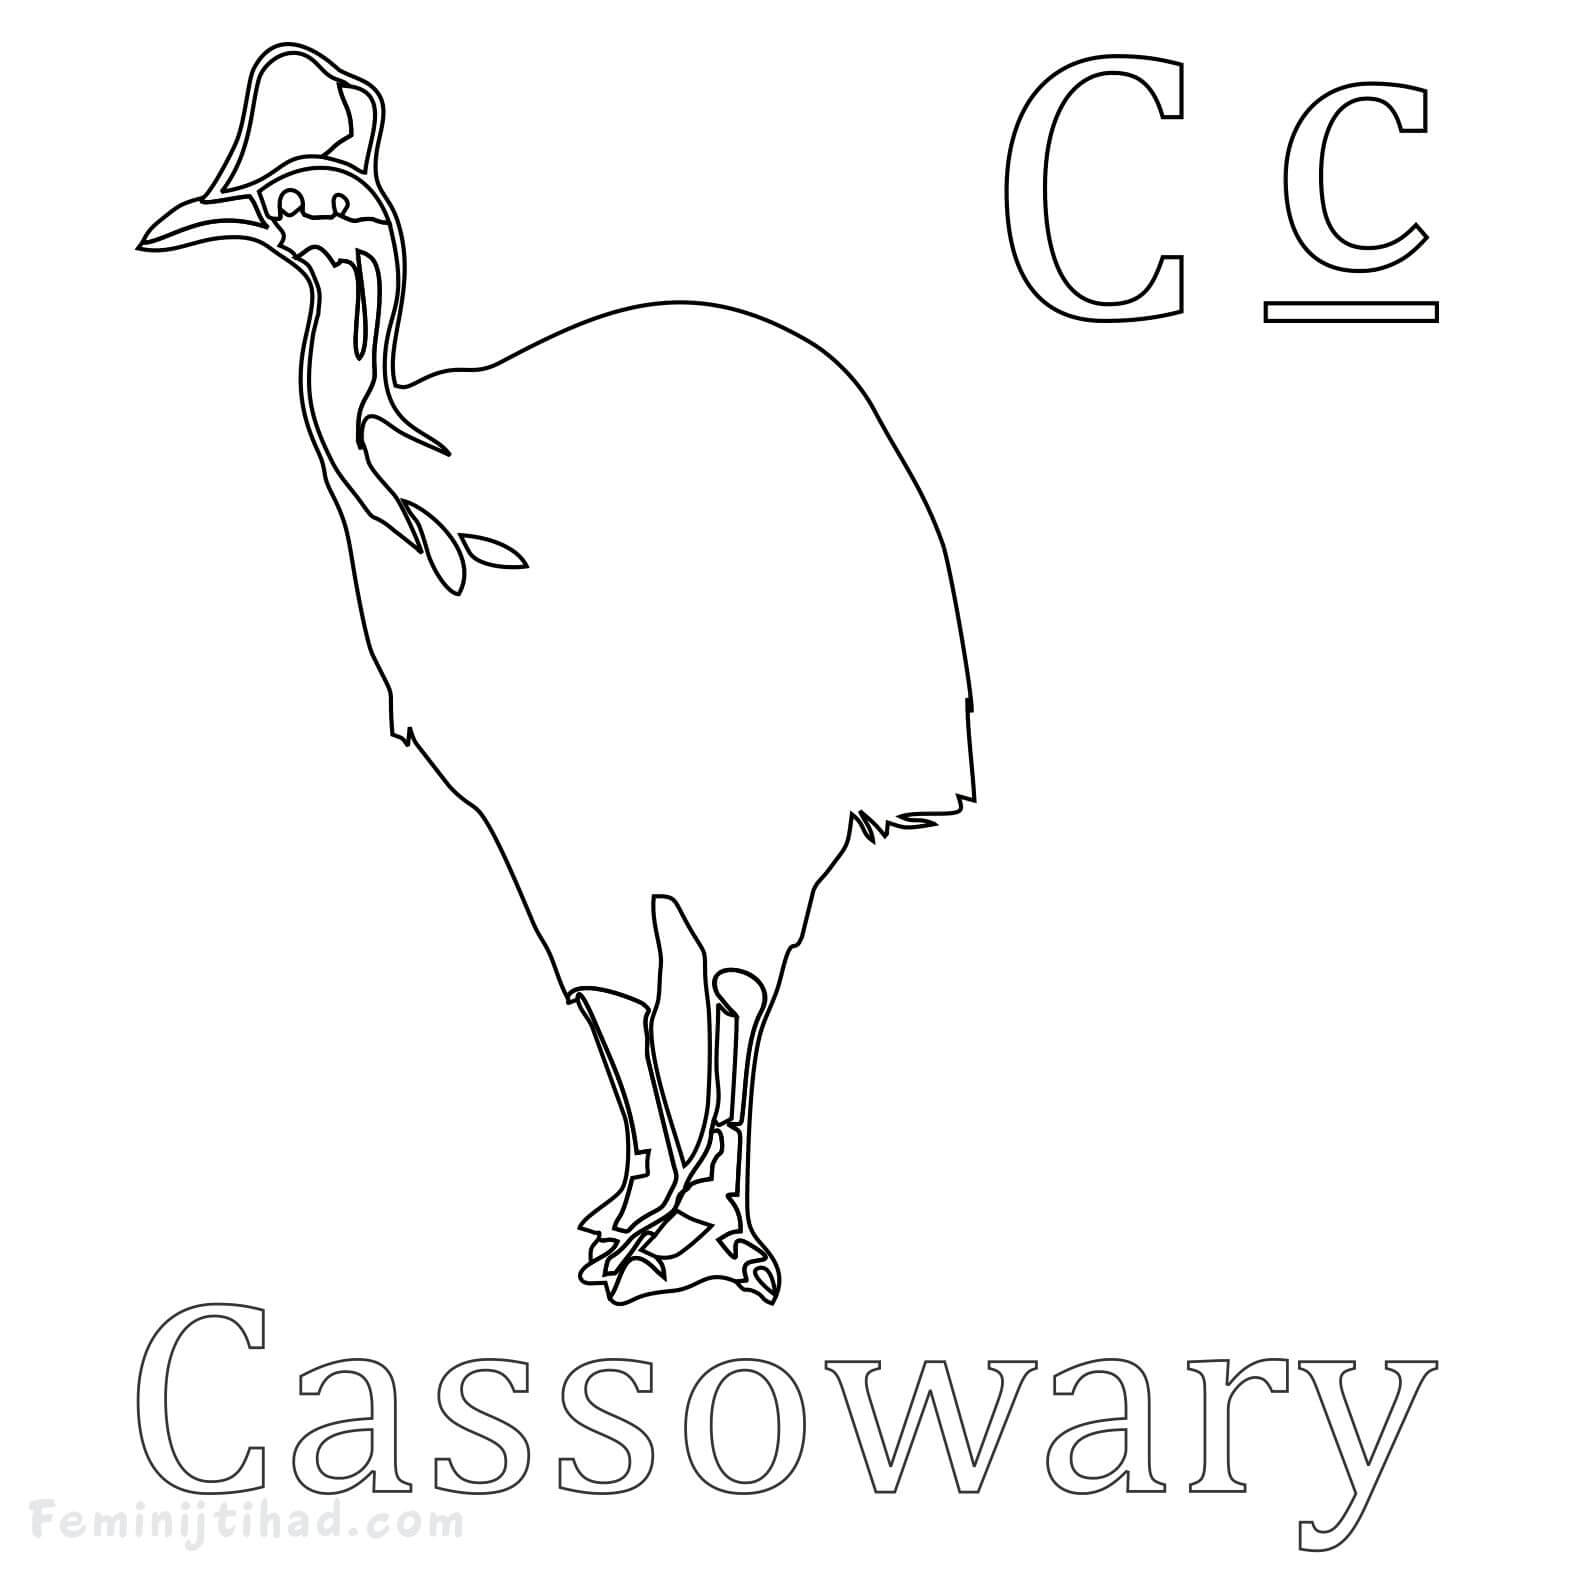 Cassowary Coloring Page Free